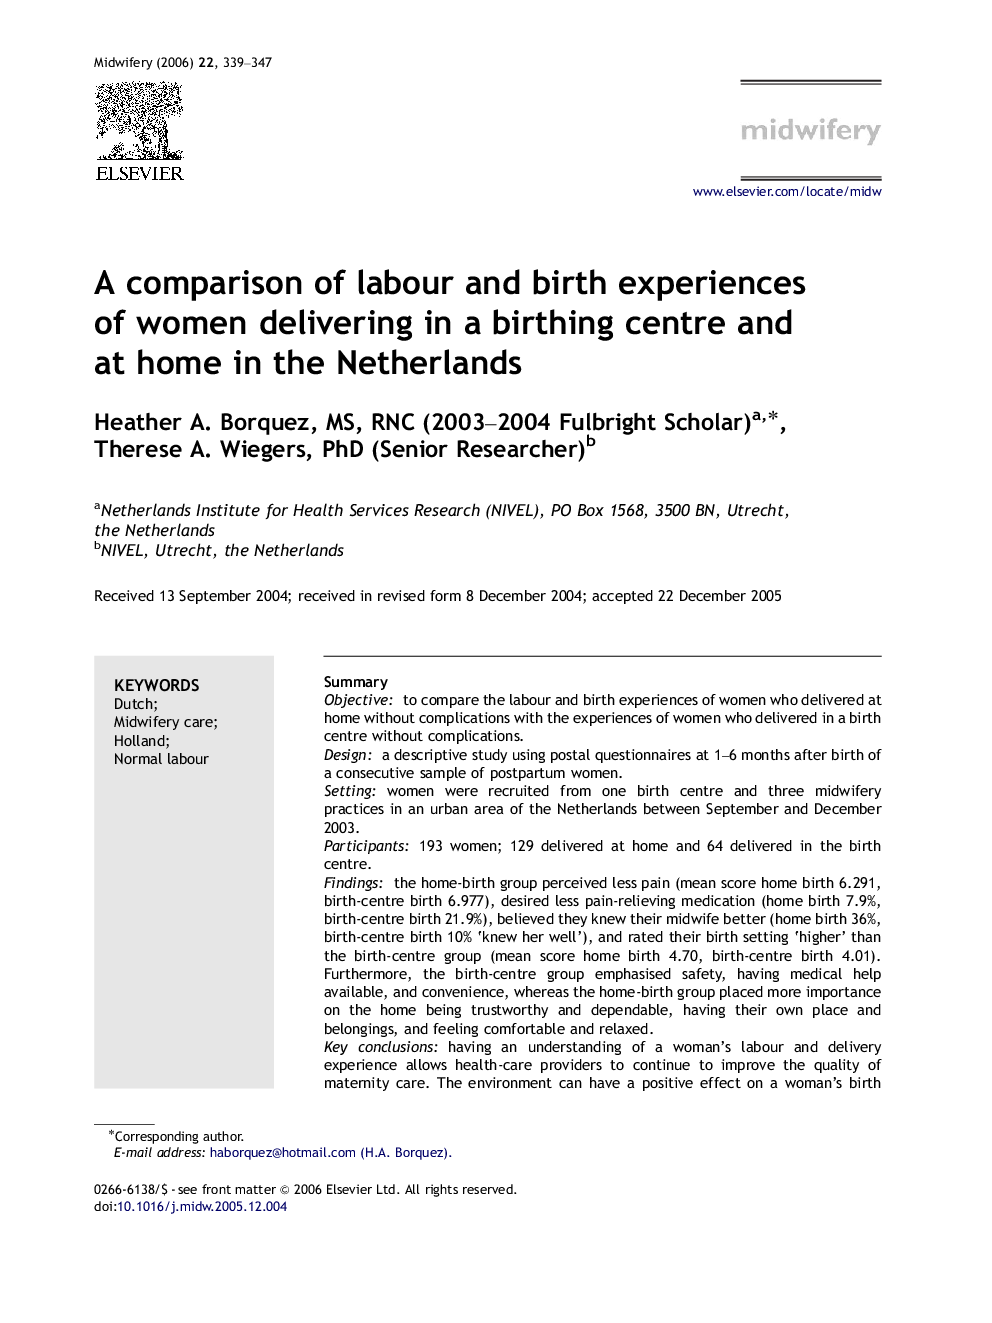 A comparison of labour and birth experiences of women delivering in a birthing centre and at home in the Netherlands